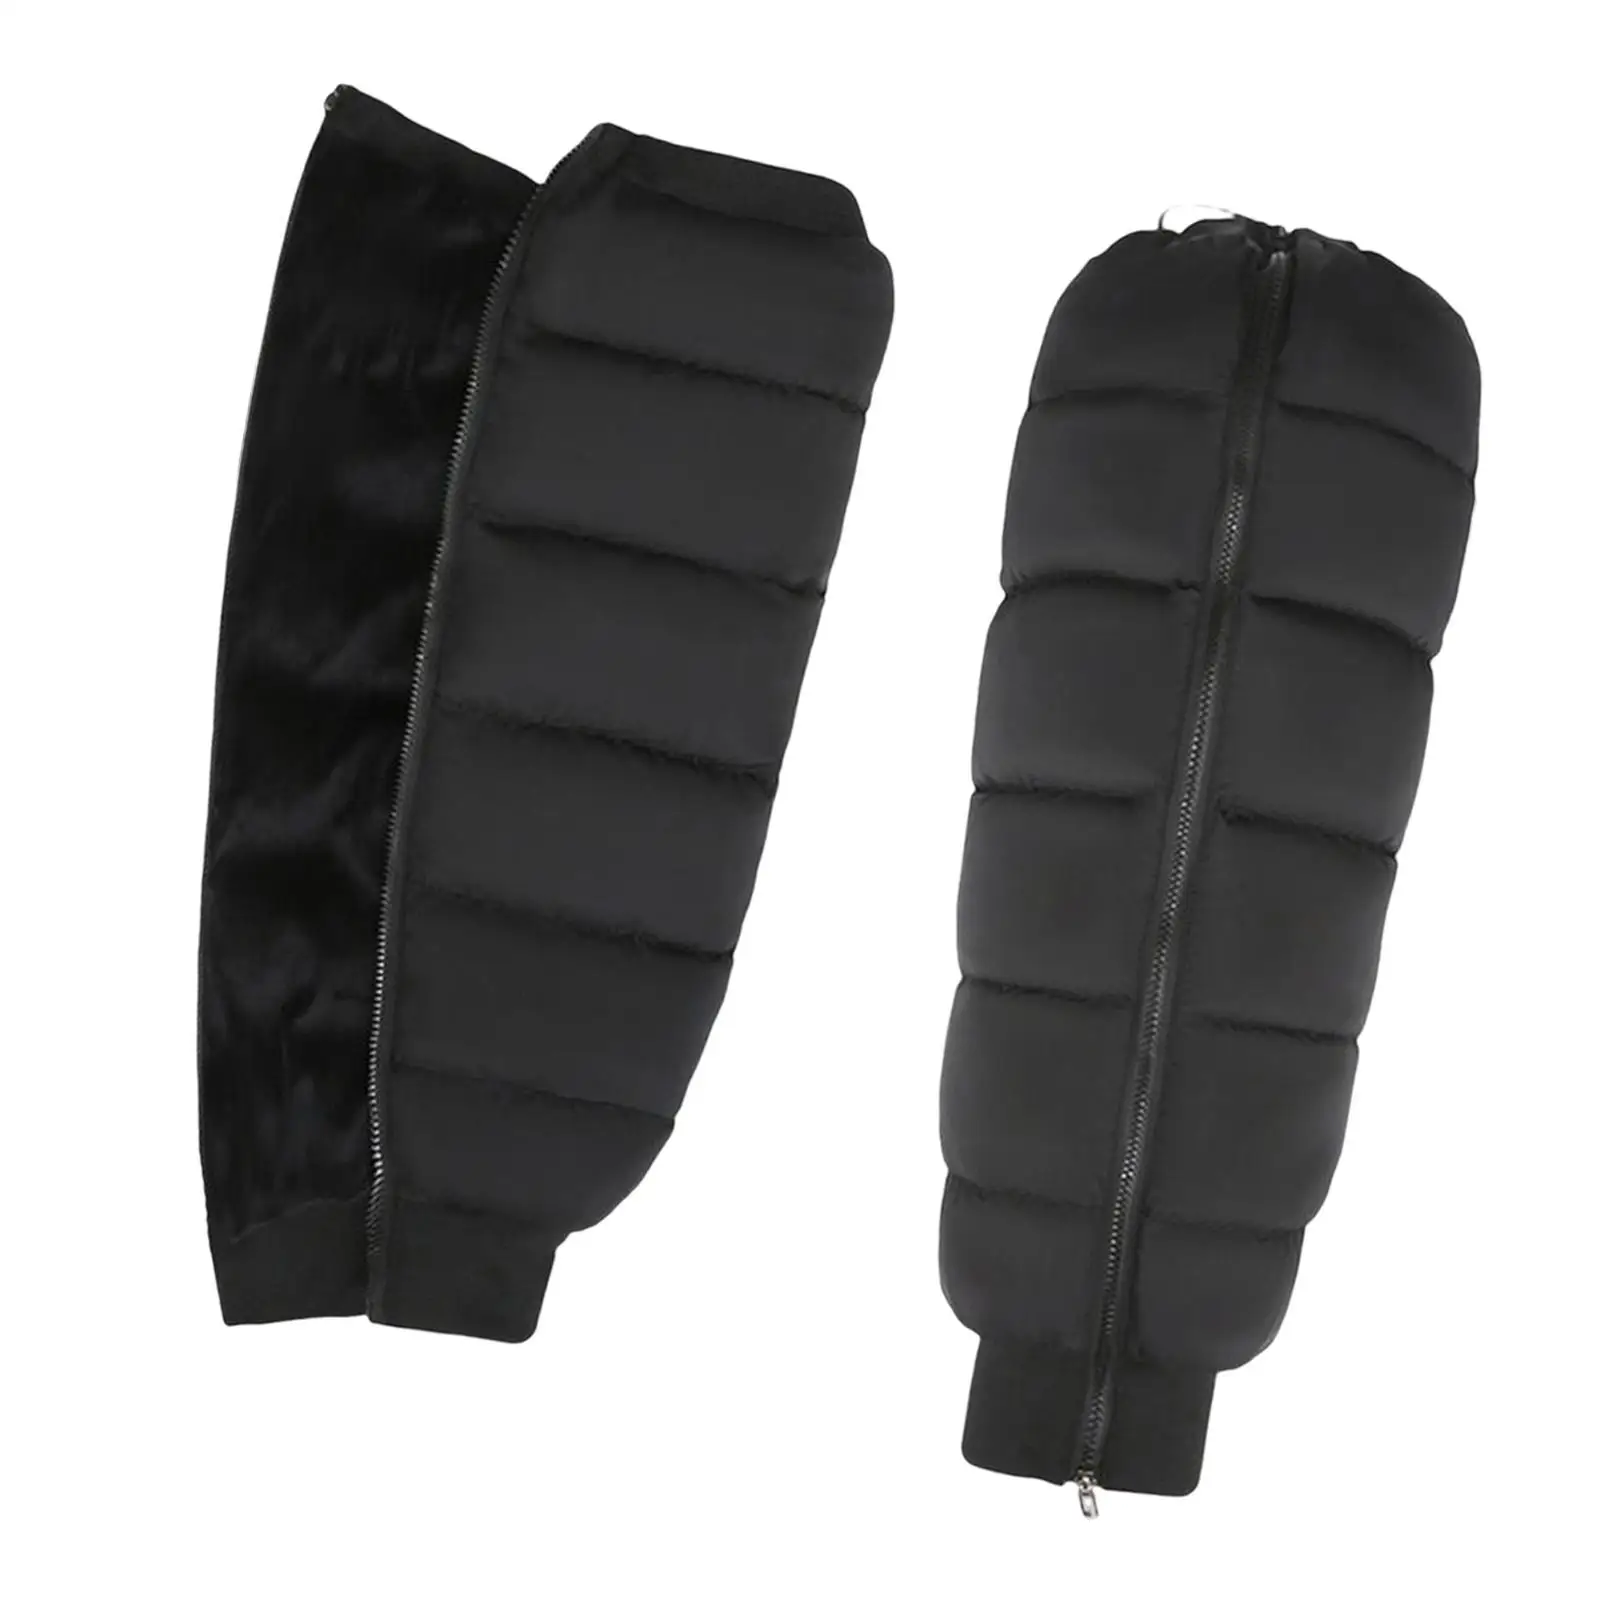 1 Pair Winter Cycling Knee Pads Protective Gear Protector for Skiing Riding